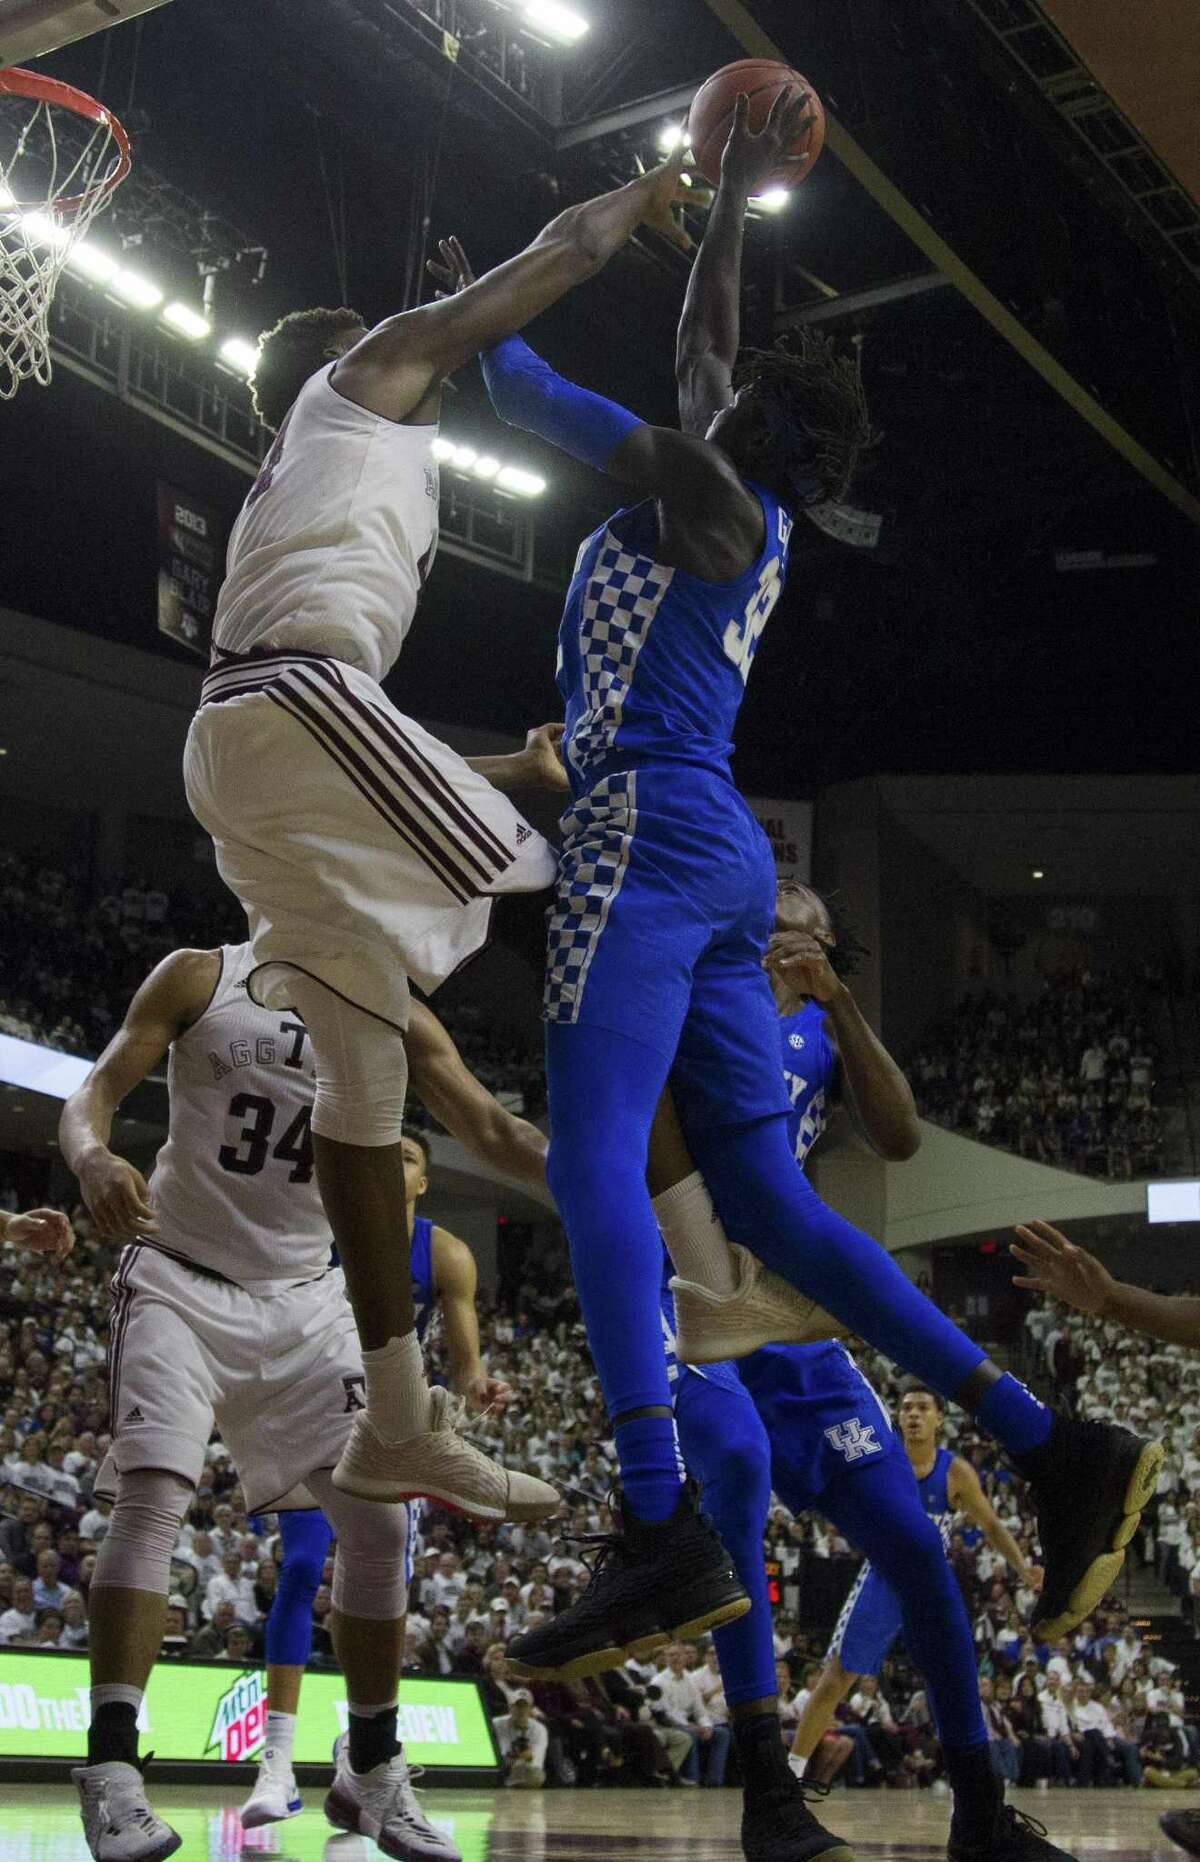 A&M forward Robert Williams (left) contests a shot by Kentucky forward Wenyen Gabriel during the second half.